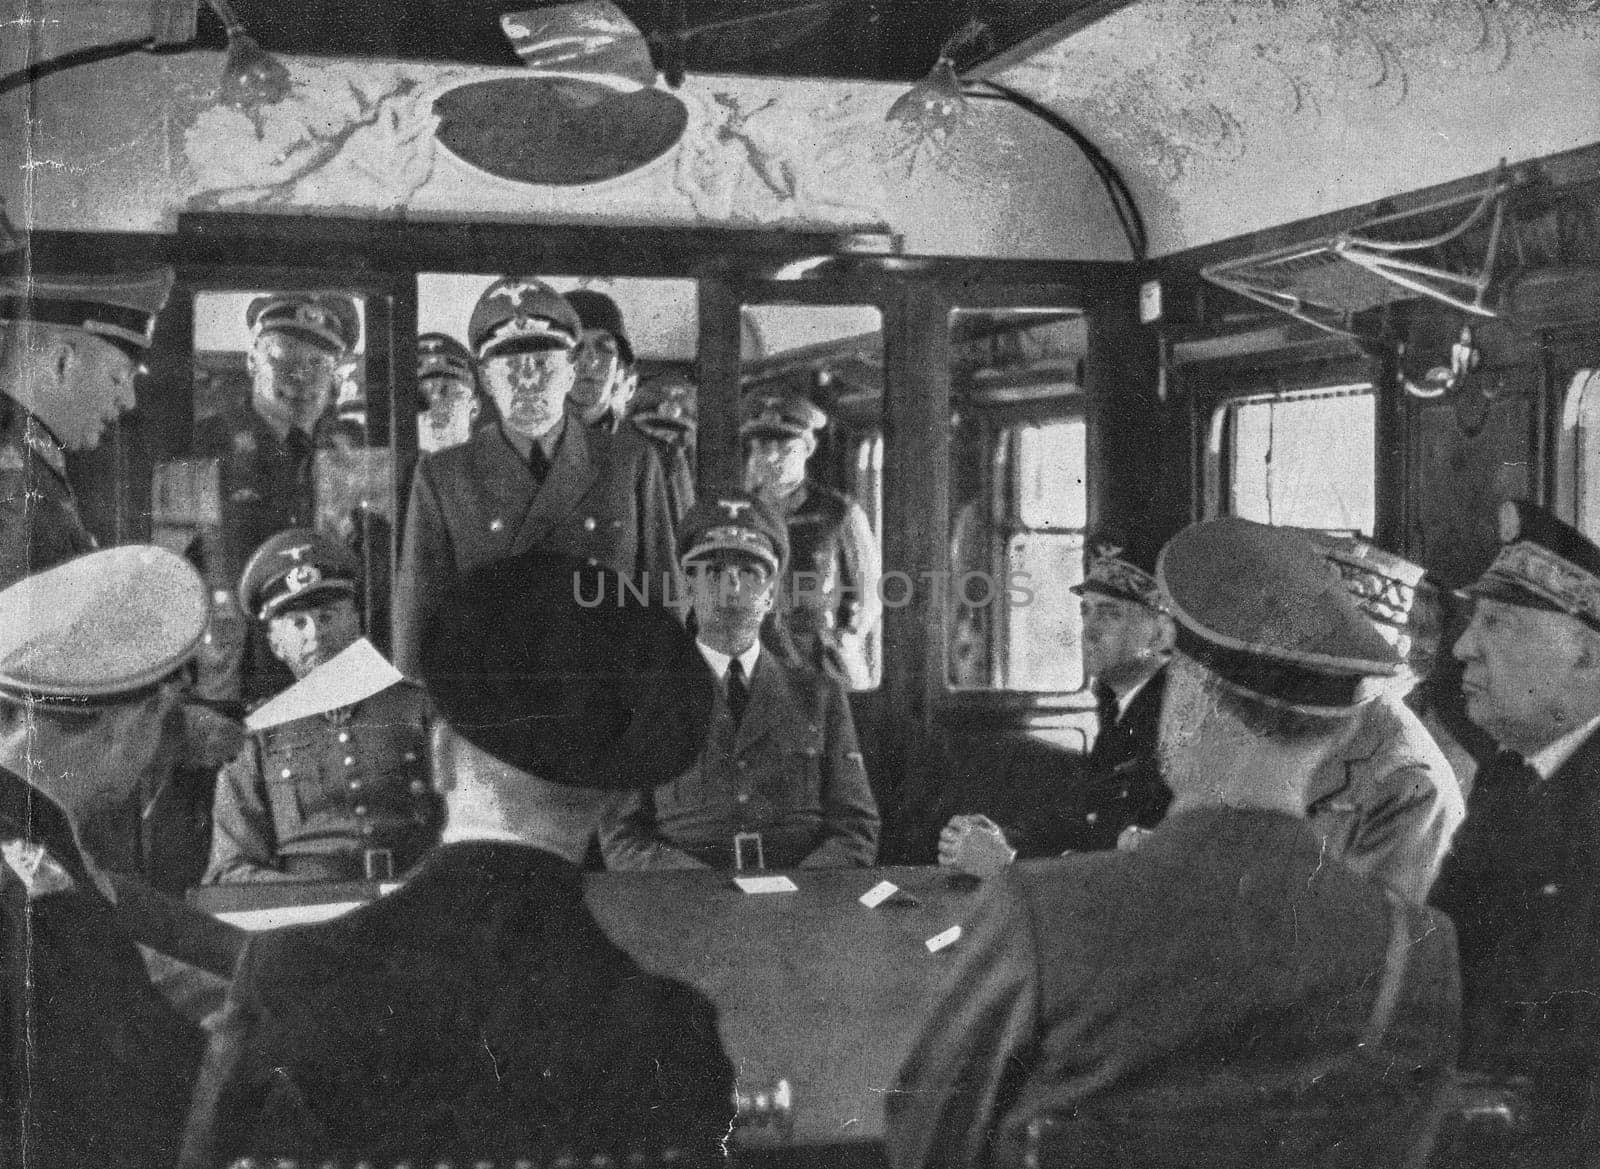 COMPI GNE, FRANCE - JUN 21, 1940: Armistice with France (Second Compiegne) was signed between Nazi Germany and the defeated France in Le Francport, near Compiegne, in the same place as in 1918, in the same railroad carriage, but with the seats swapped.